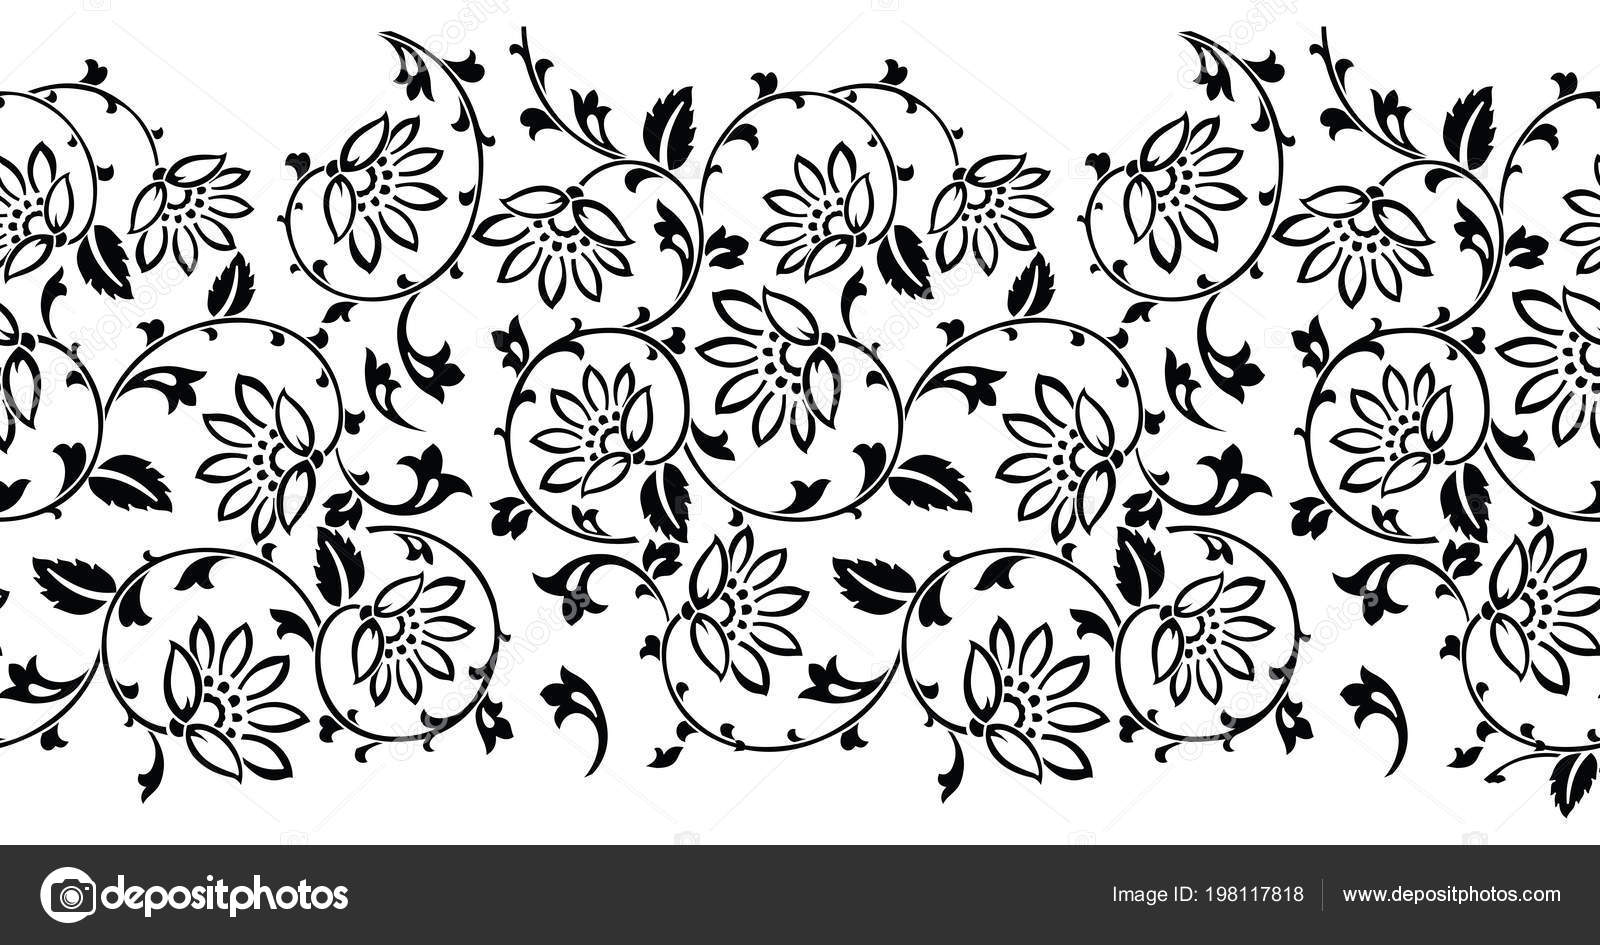 black and white simple floral border